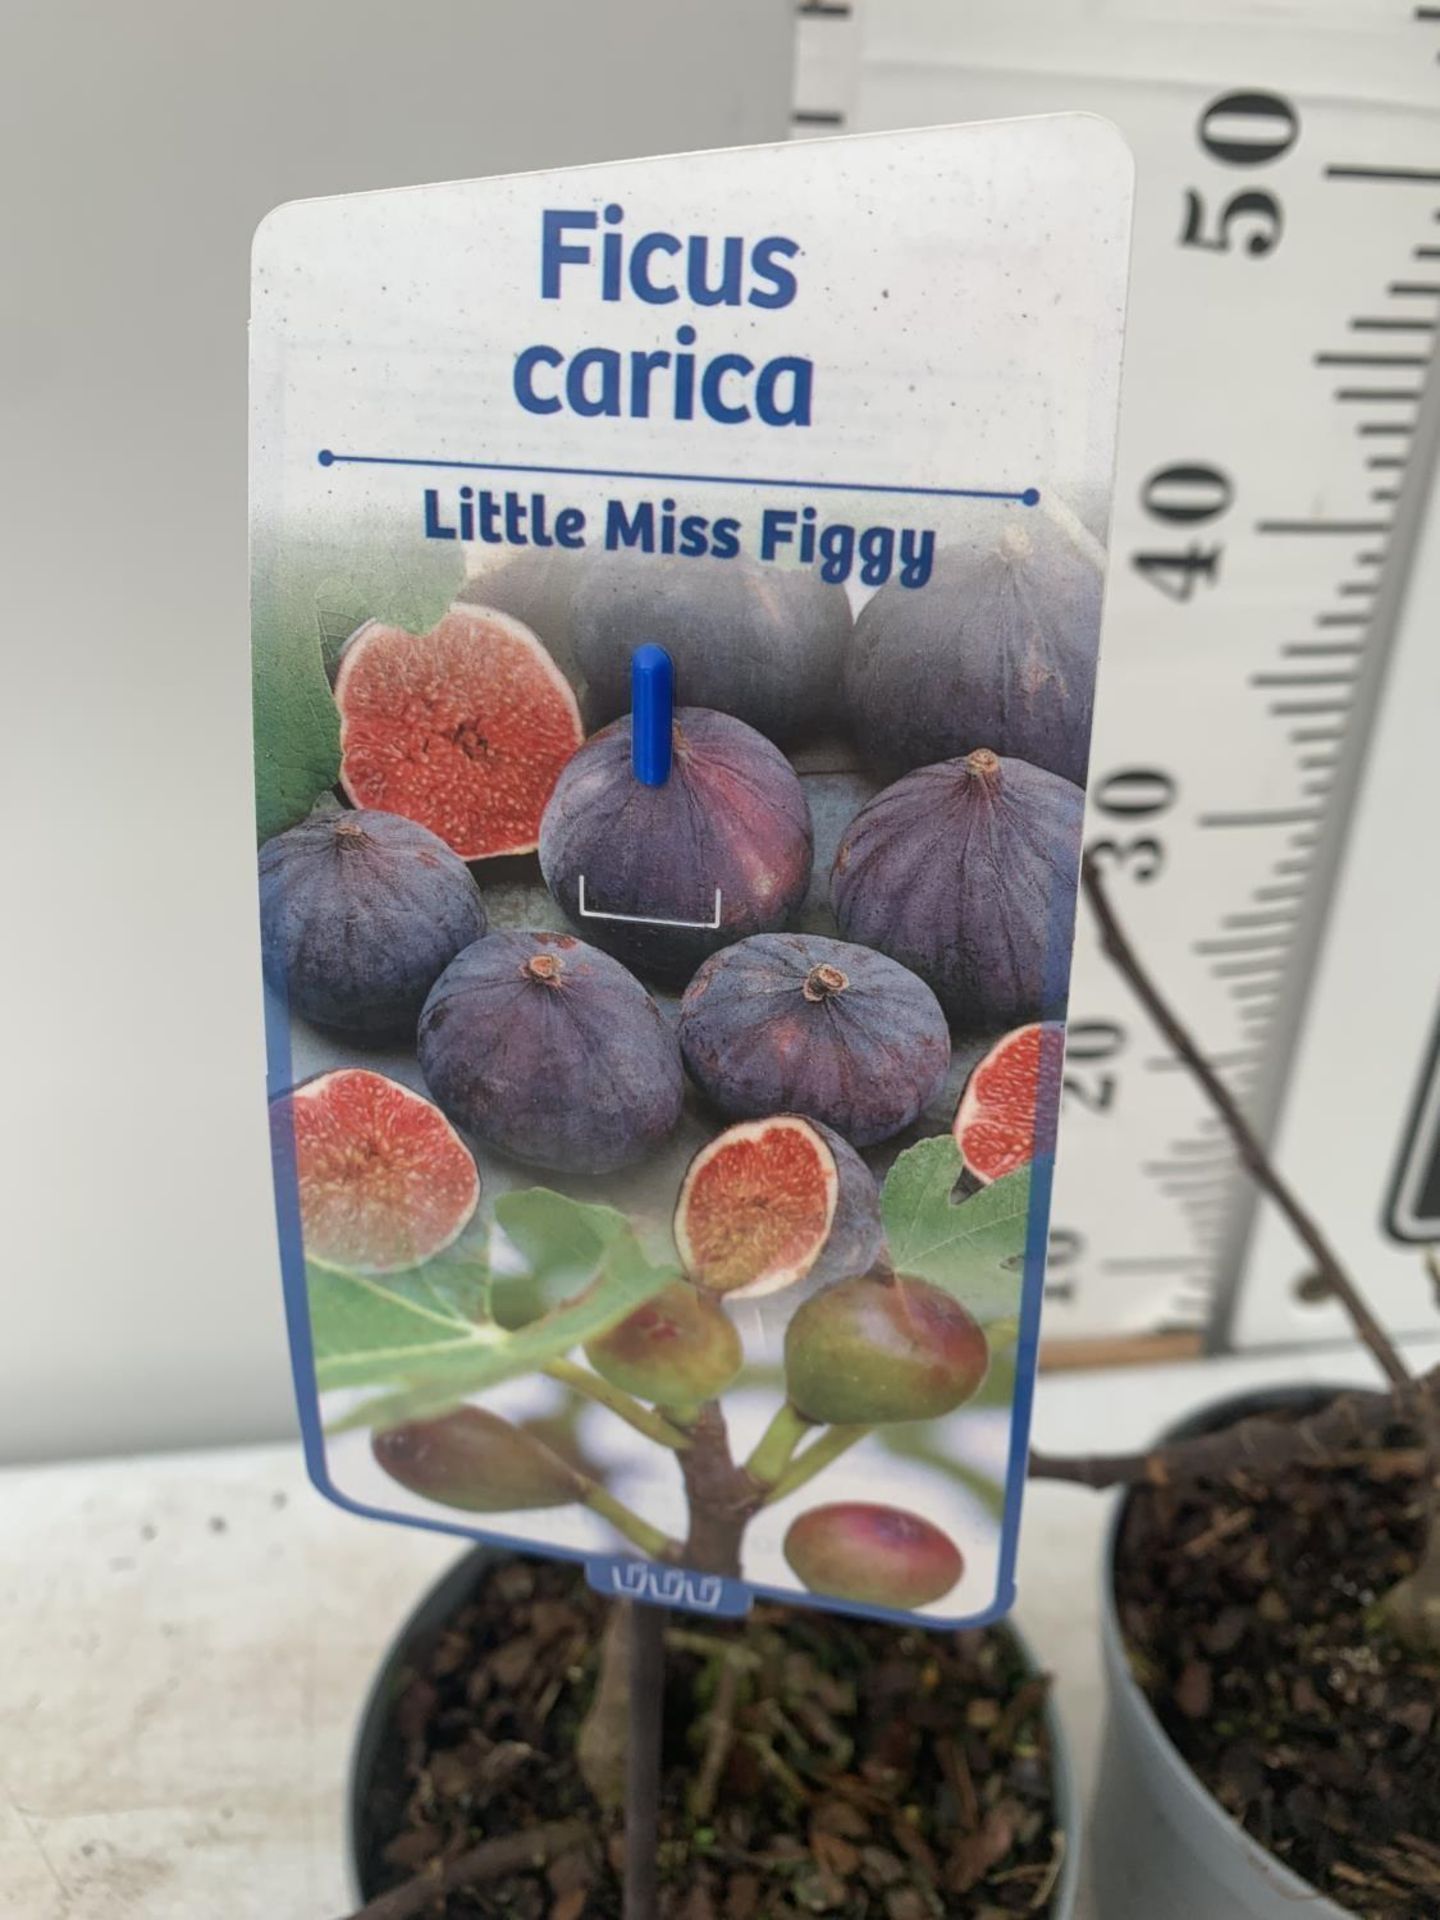 TWO FIGS FICUS CARICA 'LITTLE MISS FIGGY' IN 5 LTR POTS APPROX 35CM IN HEIGHT NO VAT TO BE SOLD - Image 4 of 4